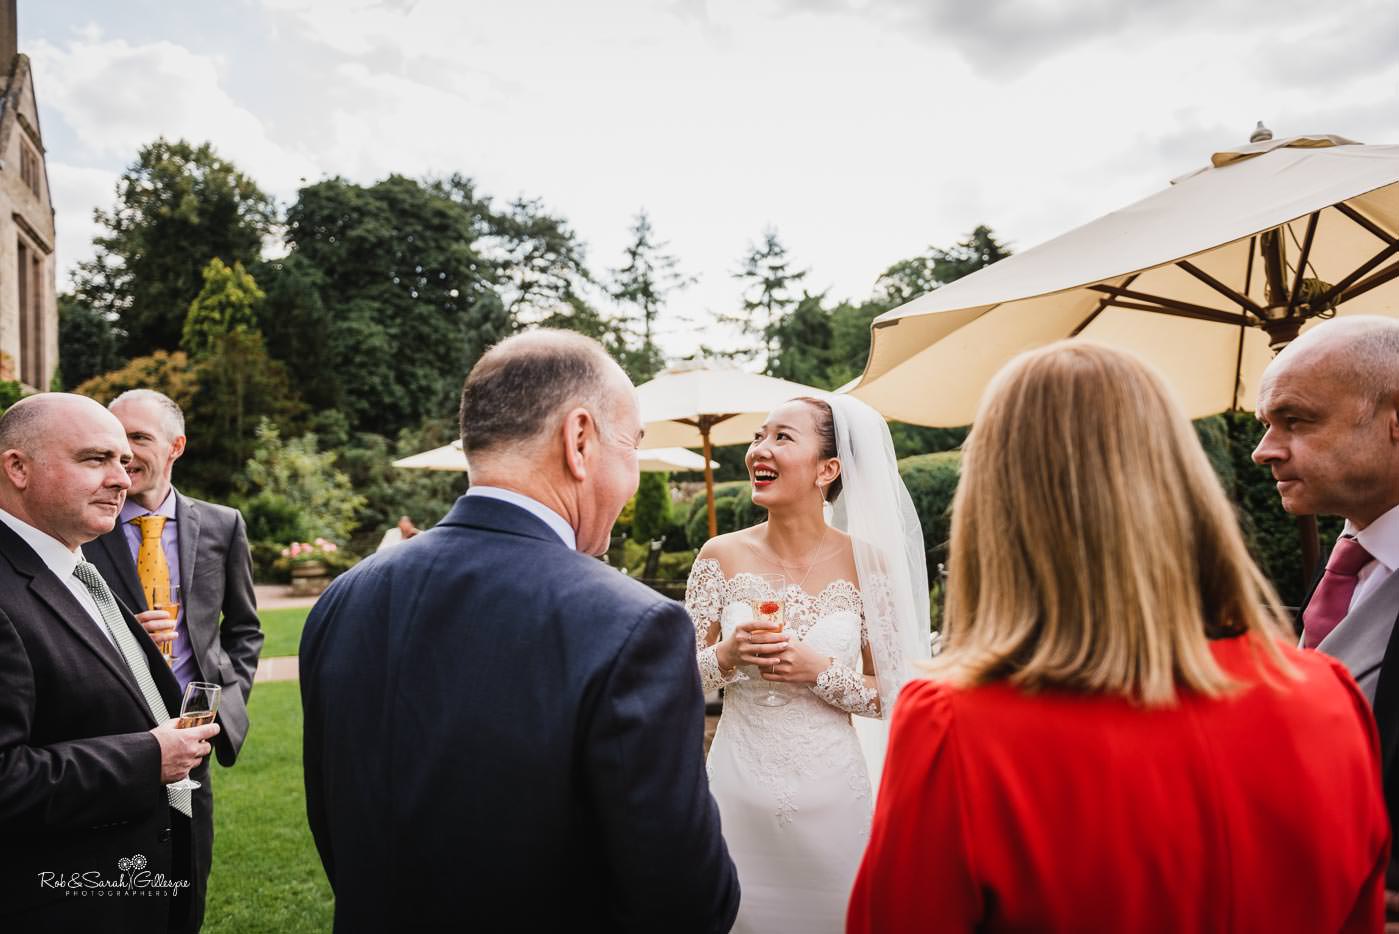 Natural and candid photos at Coombe Abbey wedding reception